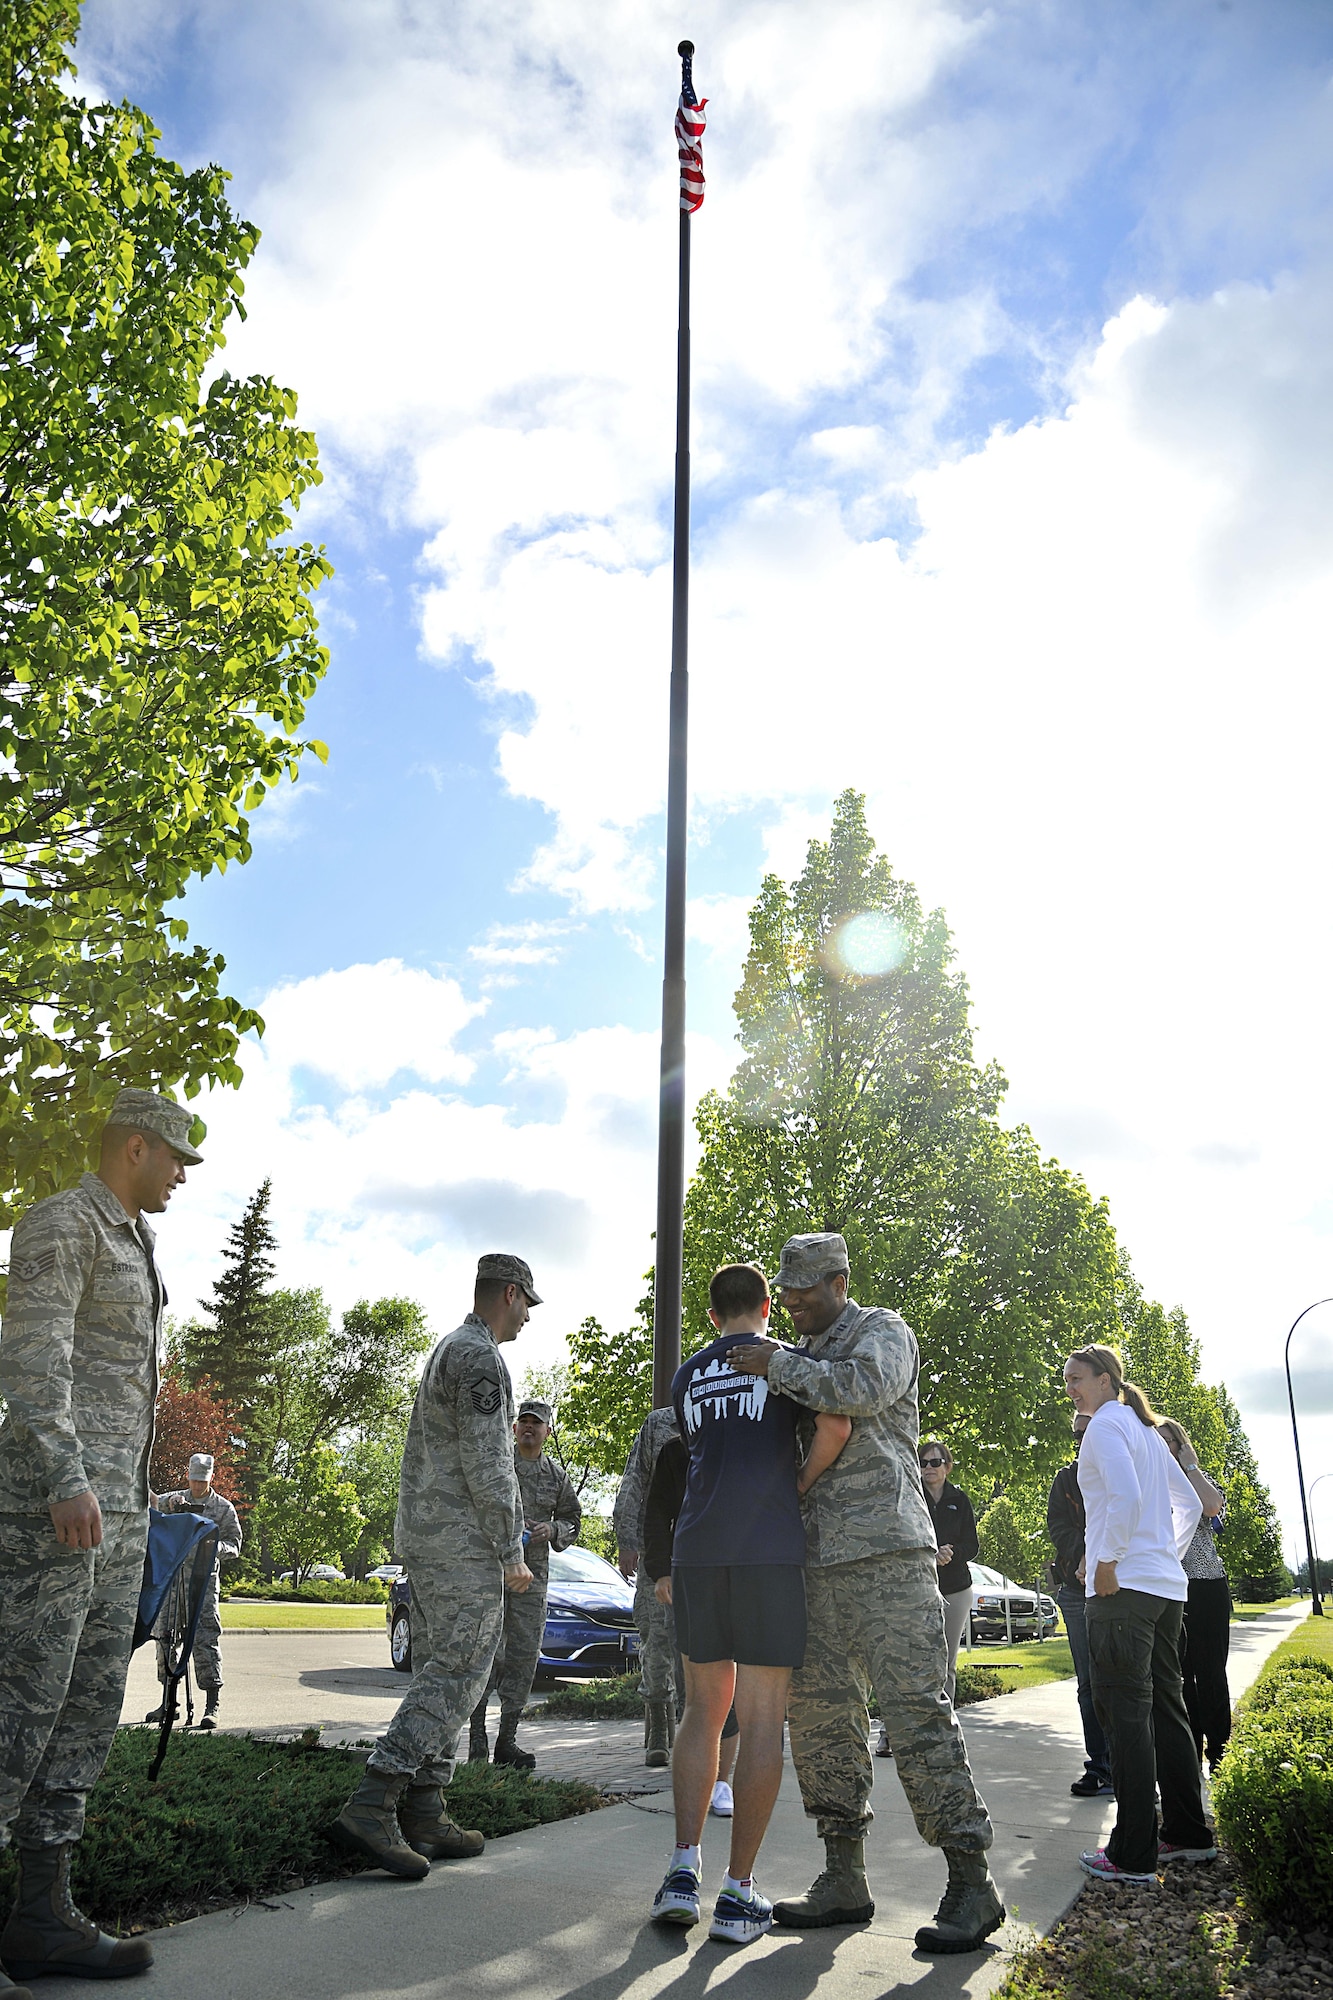 Staff Sgt. Brendan Brustad, 319th Air Base Wing assistant to the wing executive officer, is congratulated by members of the Warriors of the North in front of the wing building where he finished his 694 mile run as part of a month-long run for post-traumatic stress disorder awareness, June 30, 2016, on Grand Forks Air Force Base, N.D. The purpose of the run was to bring greater awareness to the veteran population and some of the struggles they endure. (U.S. Air Force photo by Senior Airman Xavier Navarro/Released)